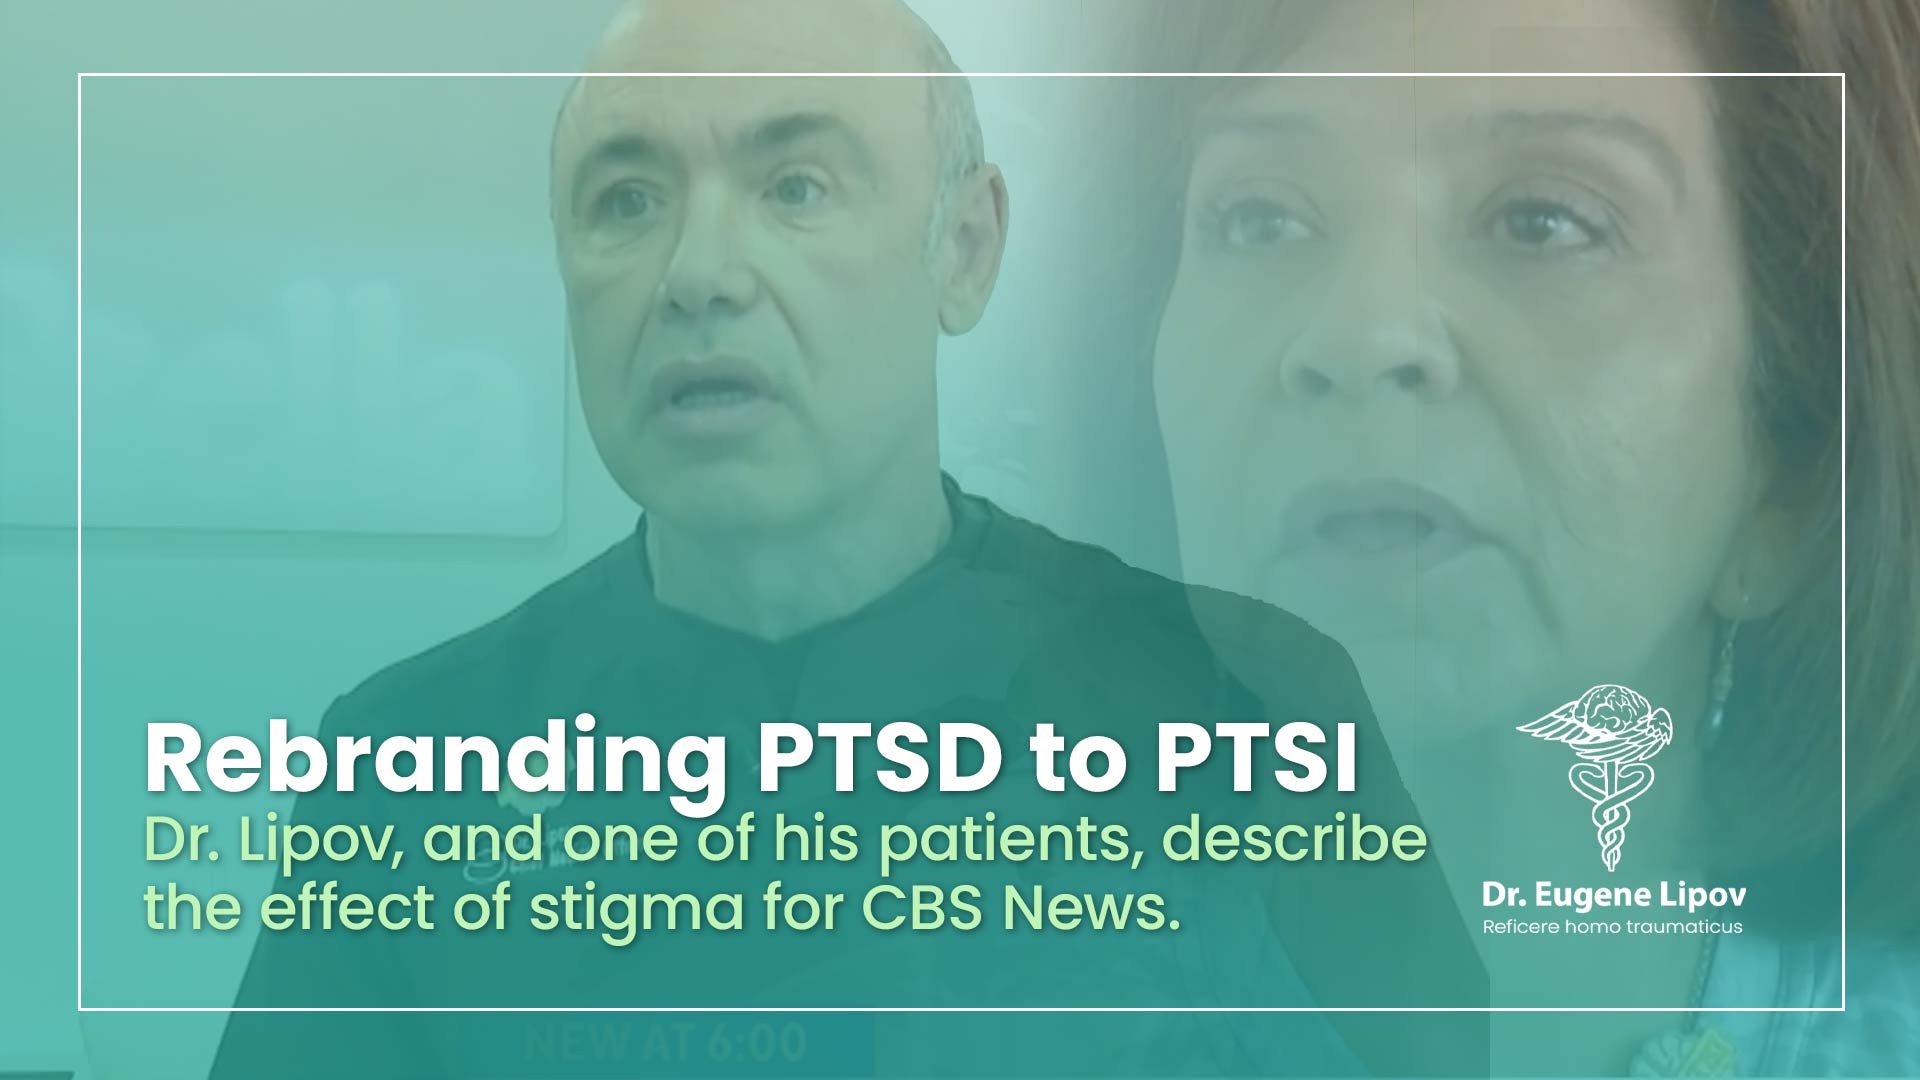 VIDEO THUMBNAIL: CBS News Chicago segment, Dr. Eugene Lipov, and one of his patients suffering from non-combatant trauma, describe the stifling effects that a ‘disorder” has on people who should, otherwise, be seeking treatment for post-traumatic stress.